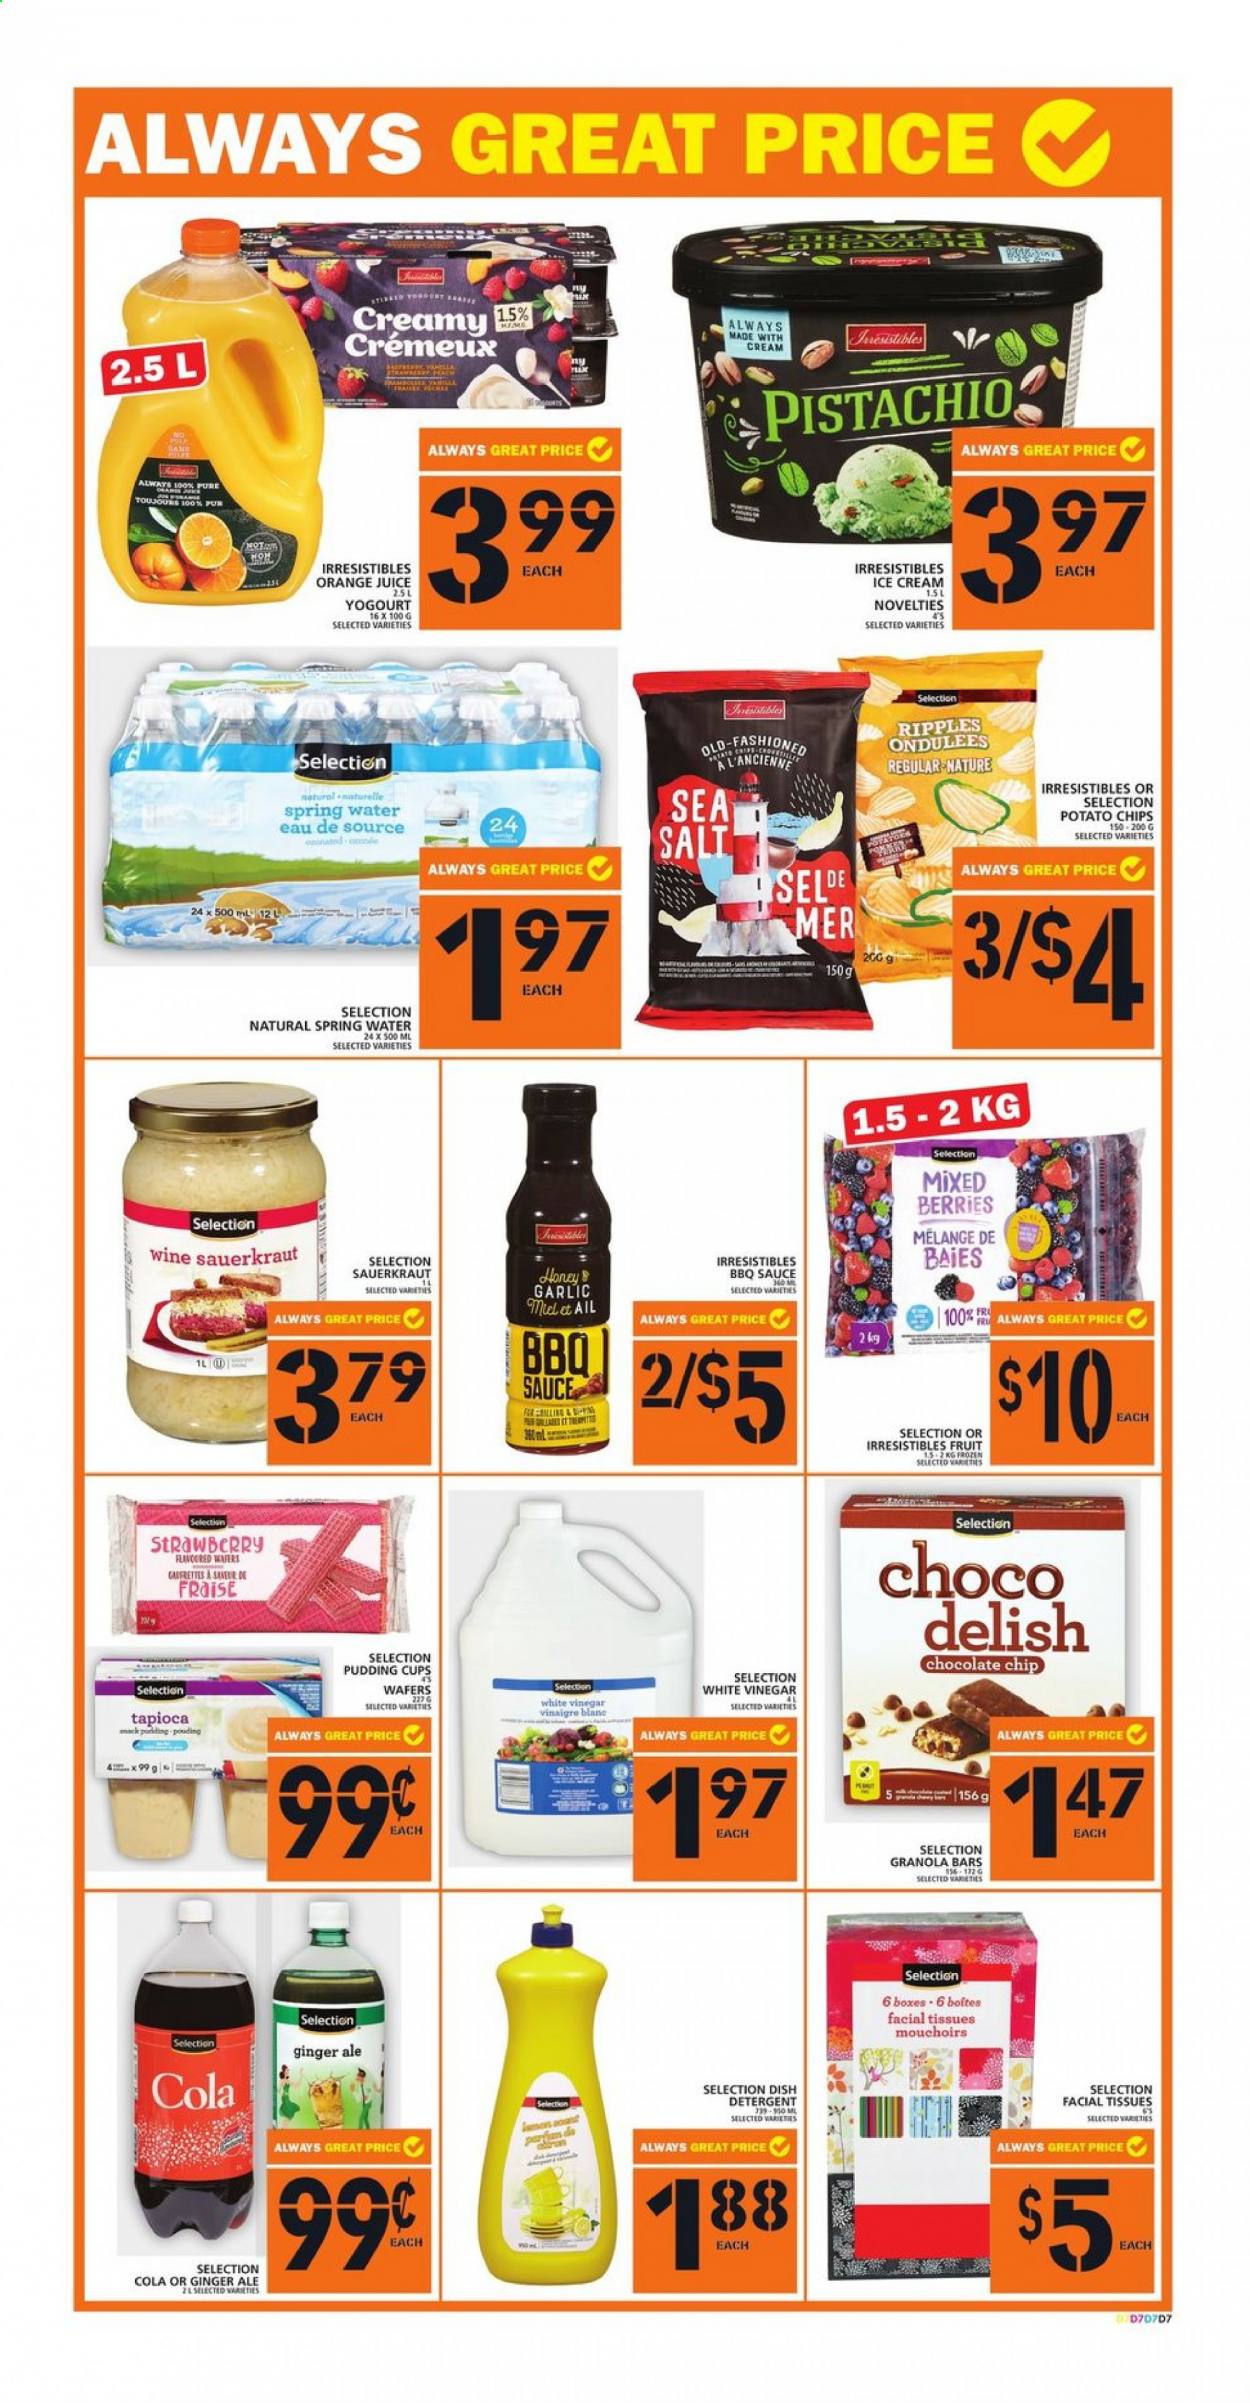 thumbnail - Food Basics Flyer - July 15, 2021 - July 21, 2021 - Sales products - garlic, Gala, sauce, pudding, ice cream, wafers, potato chips, sauerkraut, granola bar, BBQ sauce, ginger ale, orange juice, juice, spring water, tissues, facial tissues, pan, cup. Page 9.